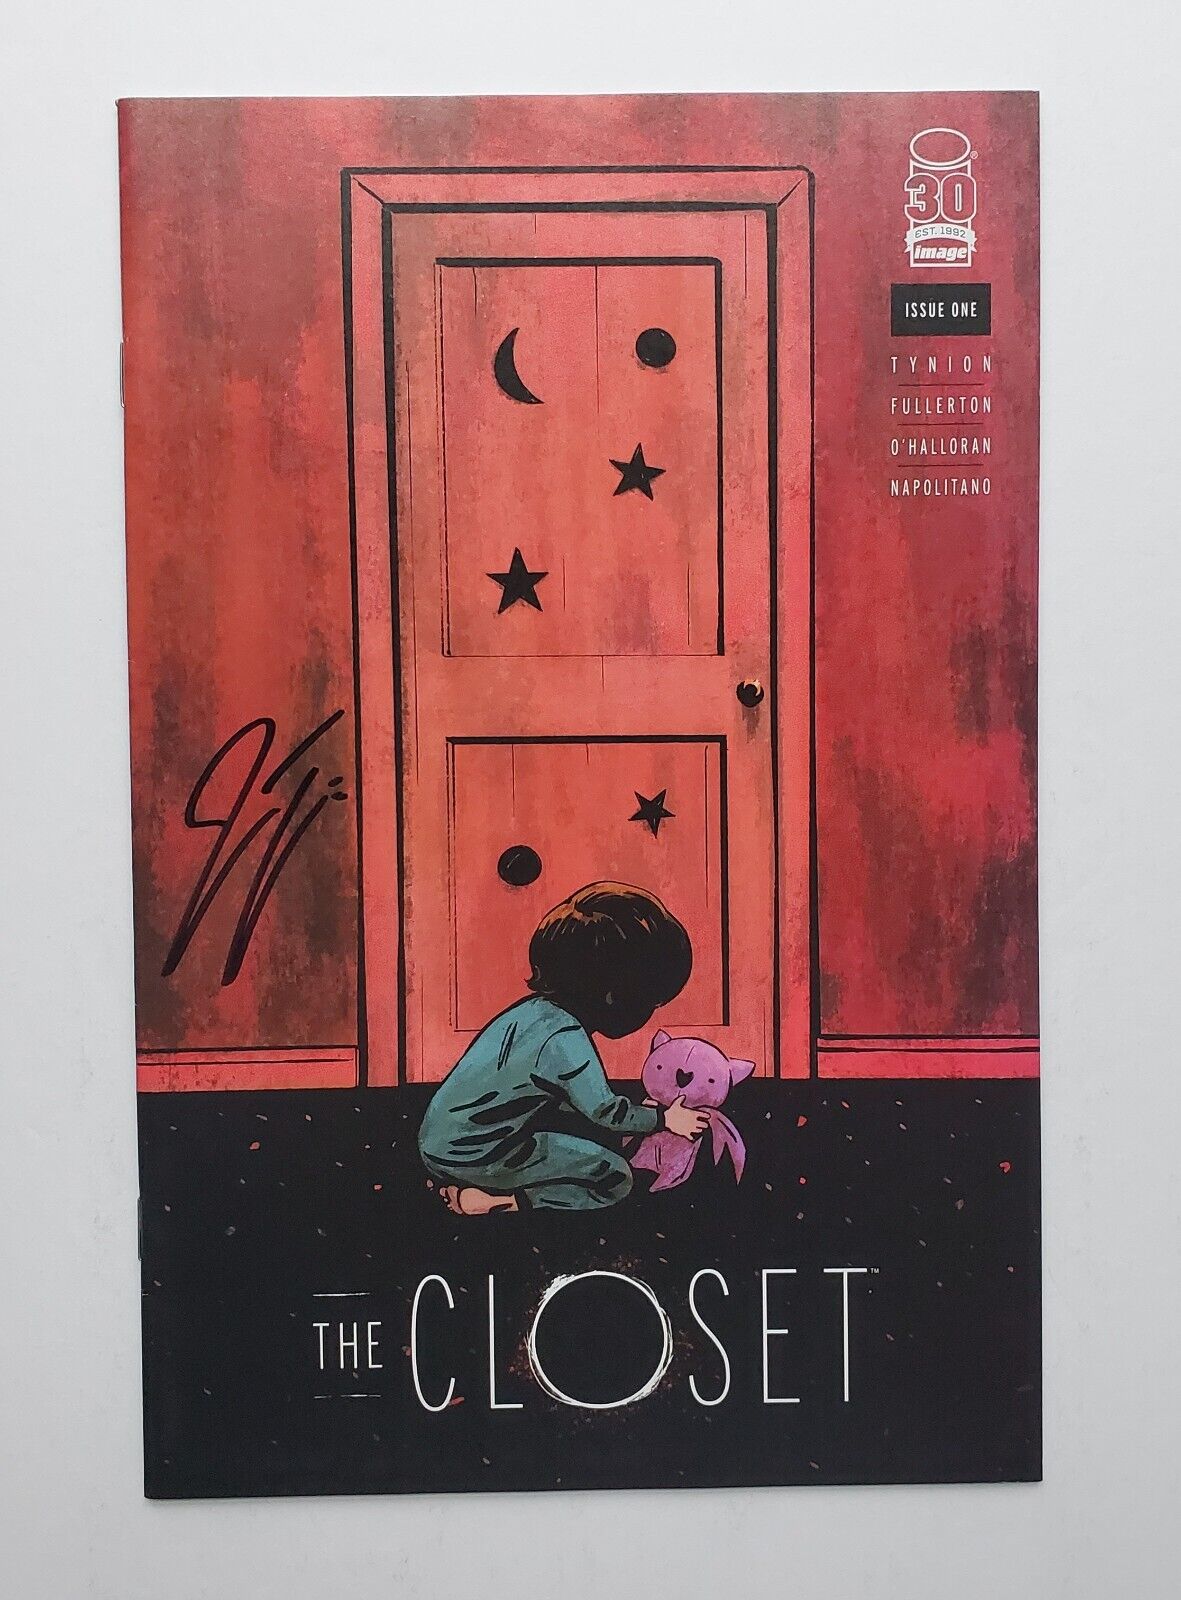 The Closet, TPB (Image Comics 2022) Signed By Artist Tynion.